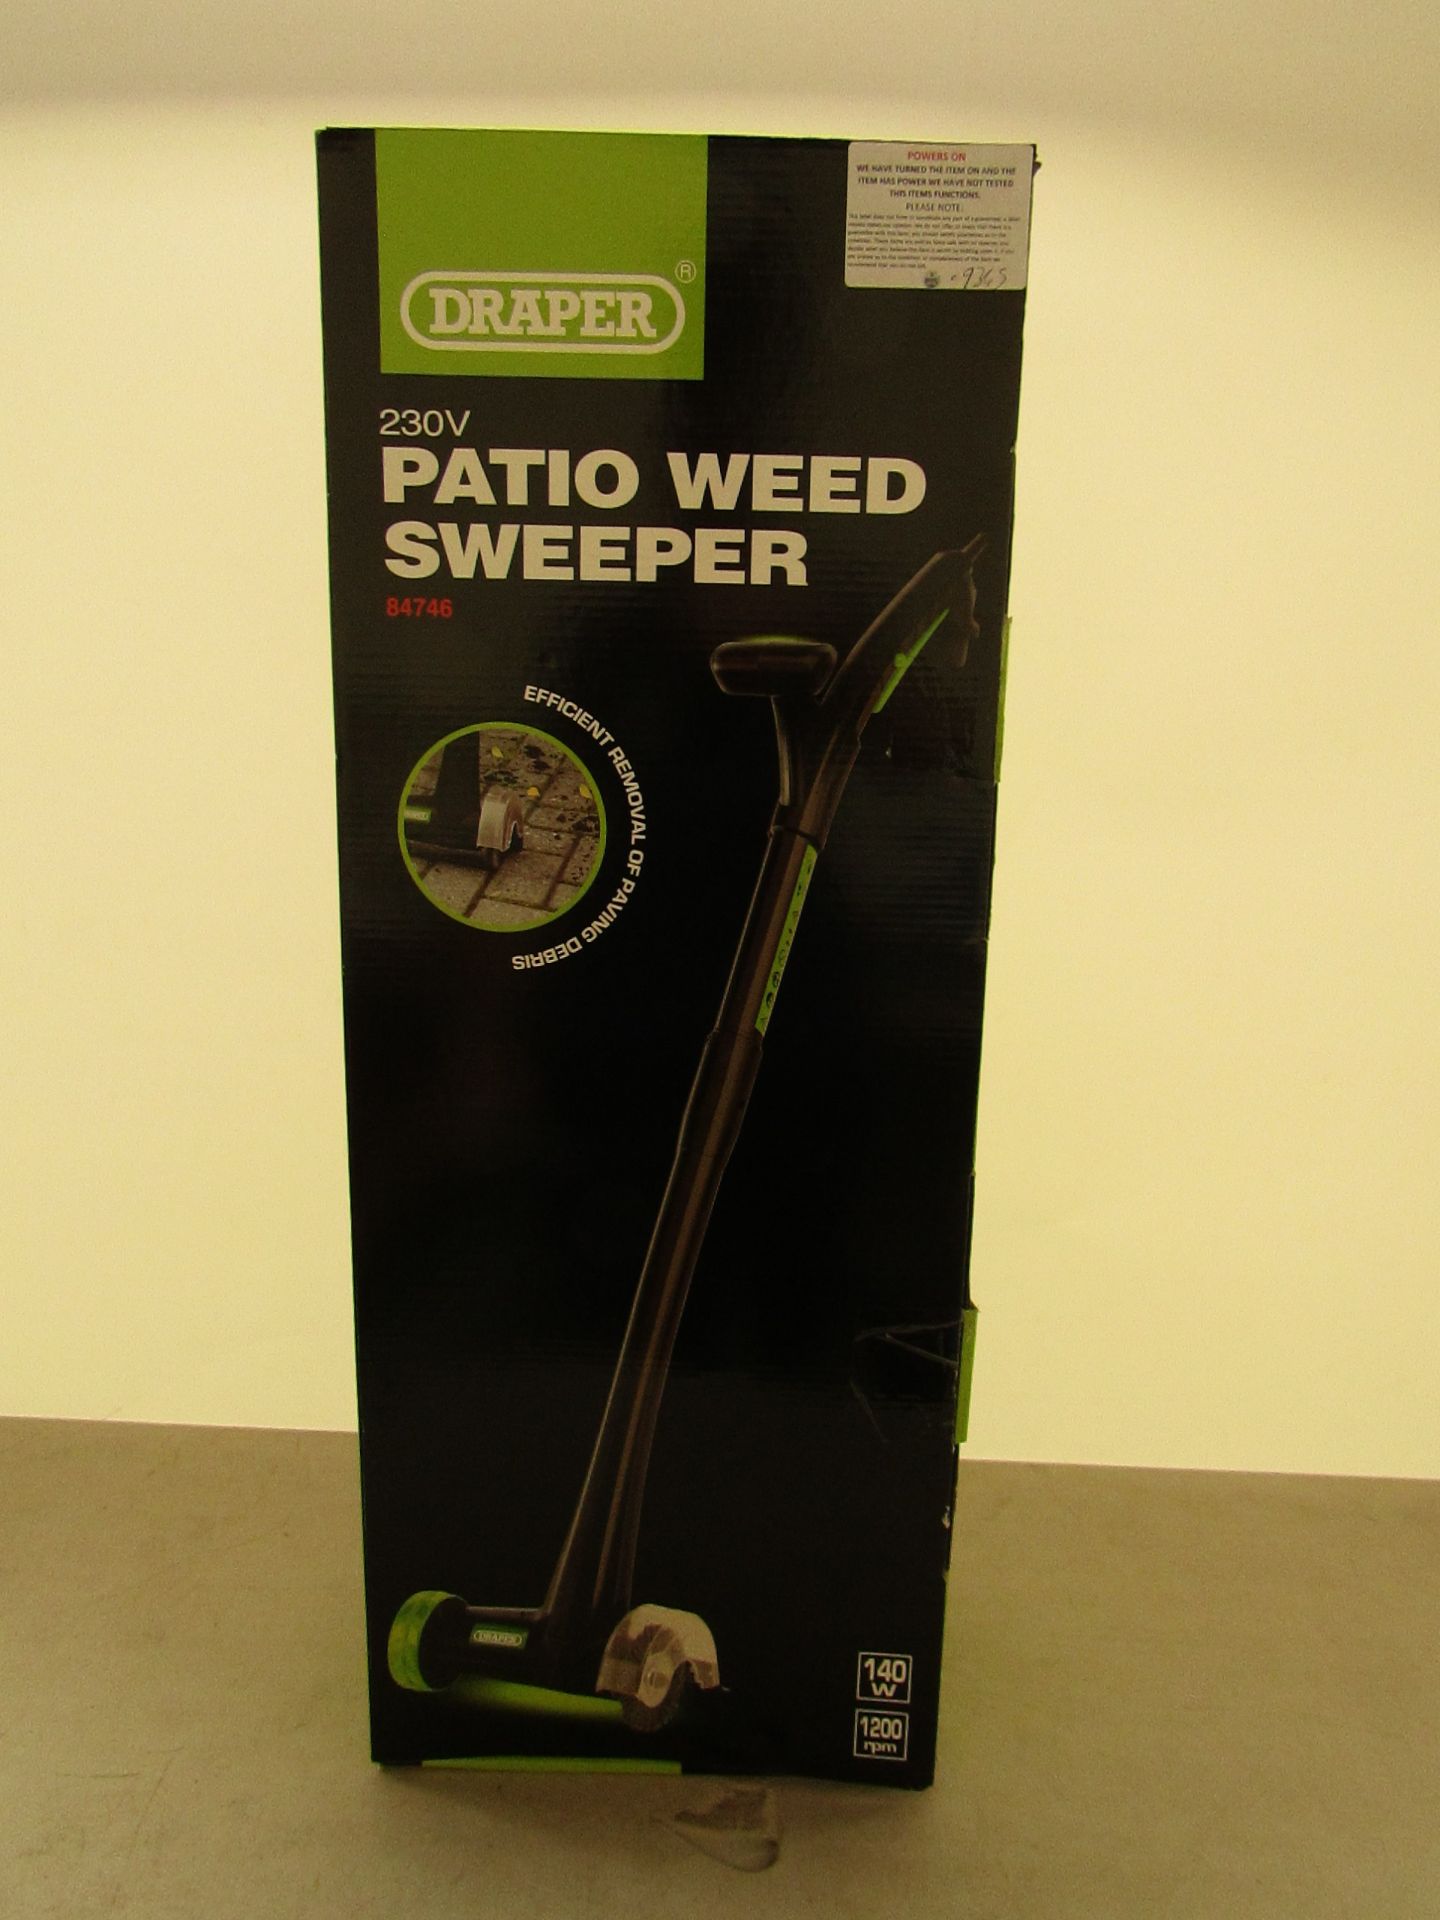 Draper 230V Patio weed sweeper, powers up and boxed.